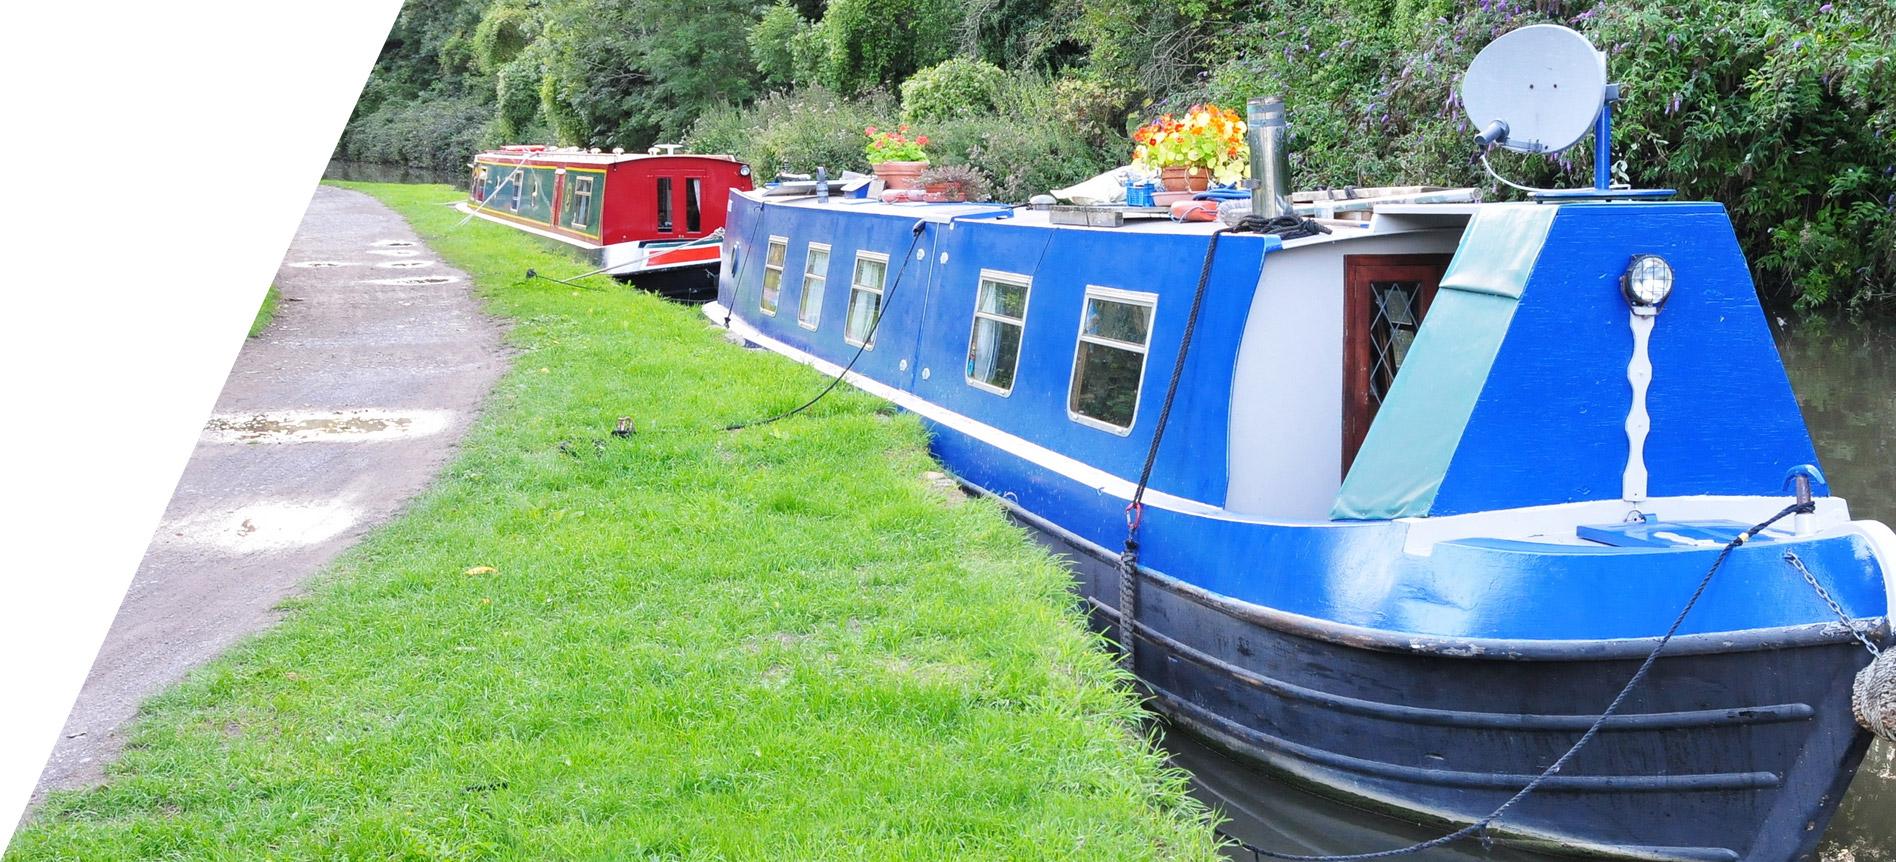 houseboats moored at canal edge